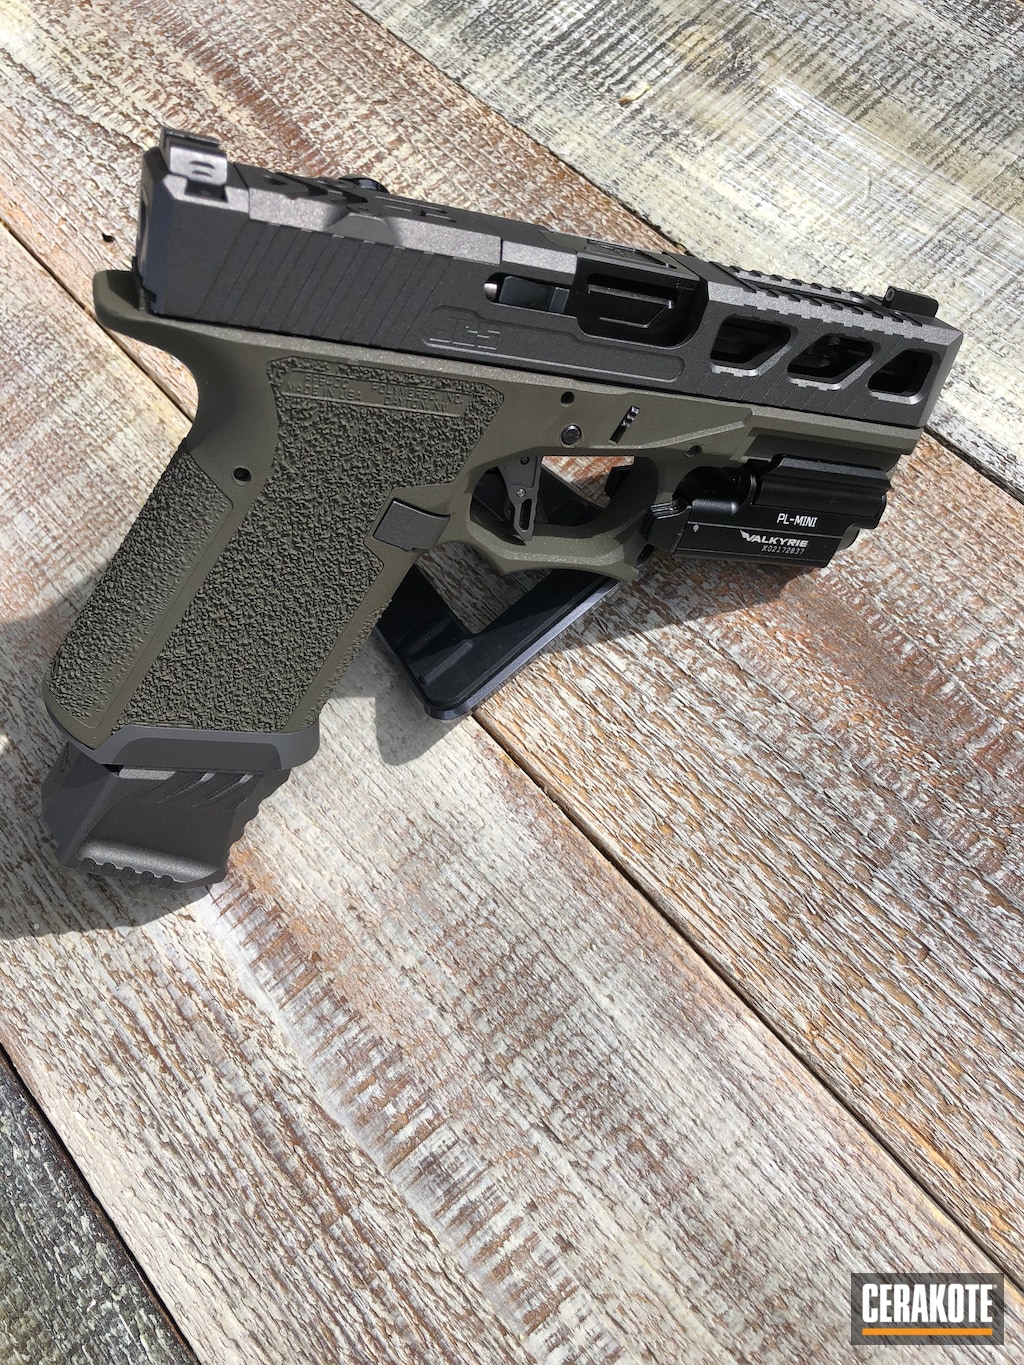 Two Toned P80 Glock Clone Coated With Cobalt Kinetics Green And Tungsten Cerakote